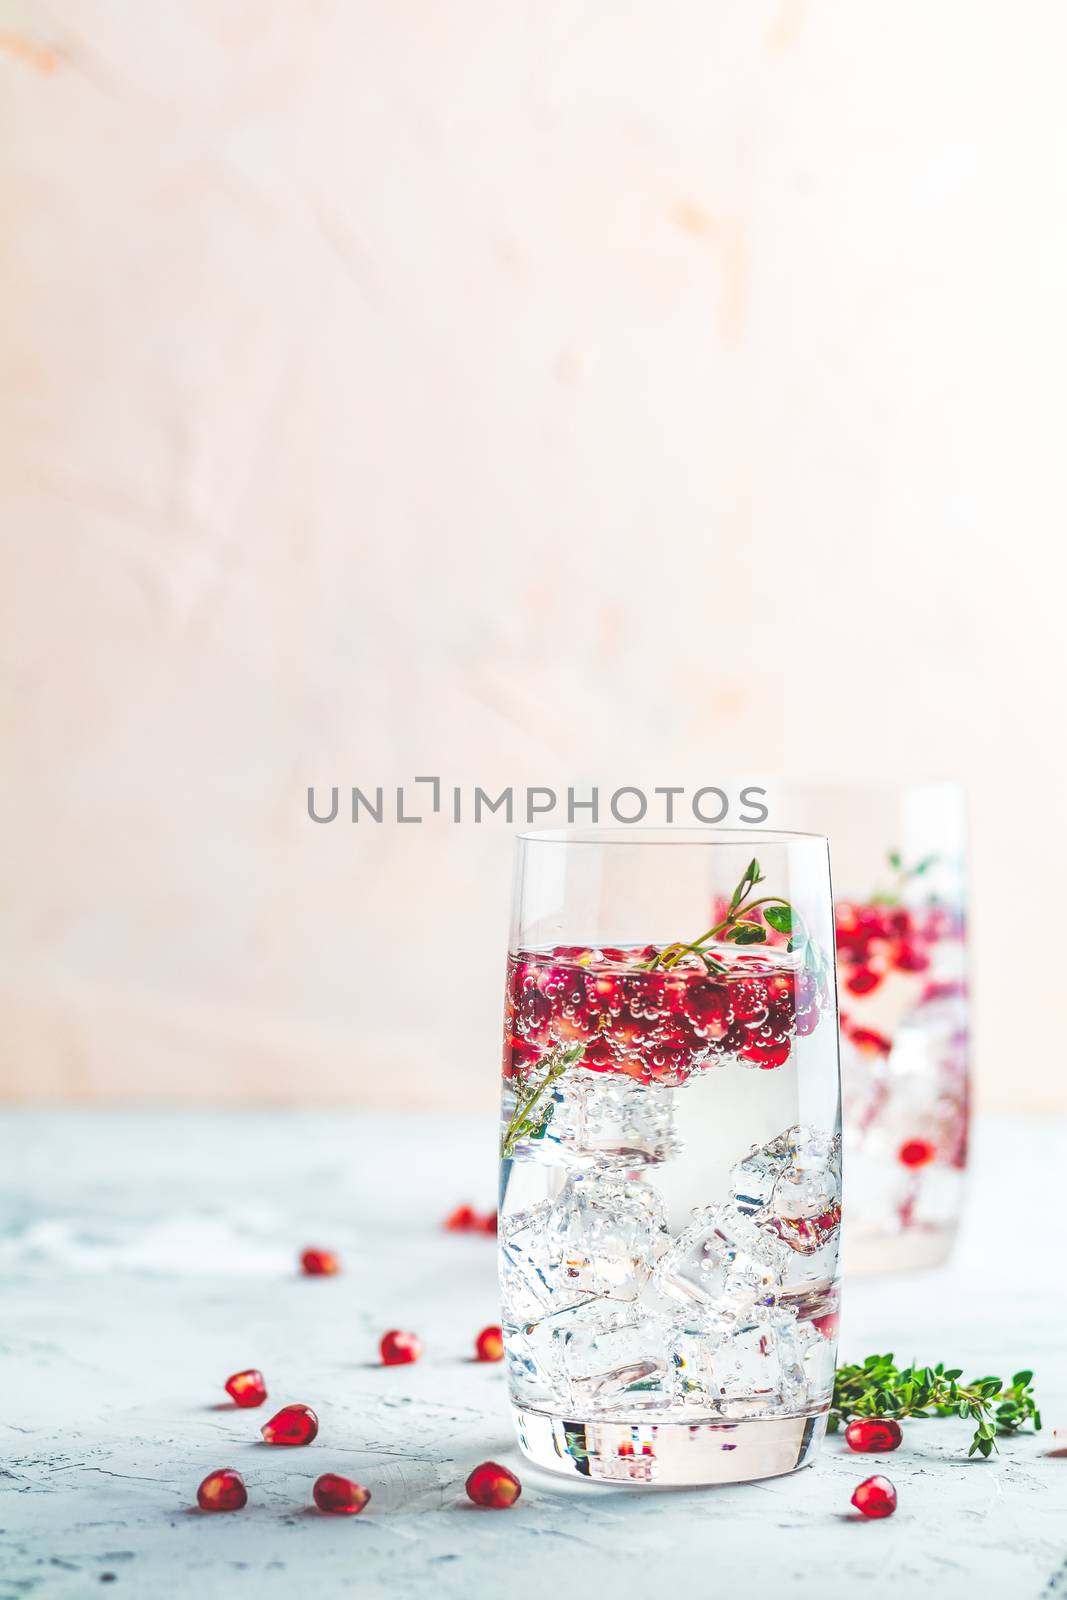 Festive drinks, gin and tonic pomegranate cocktail by ArtSvitlyna